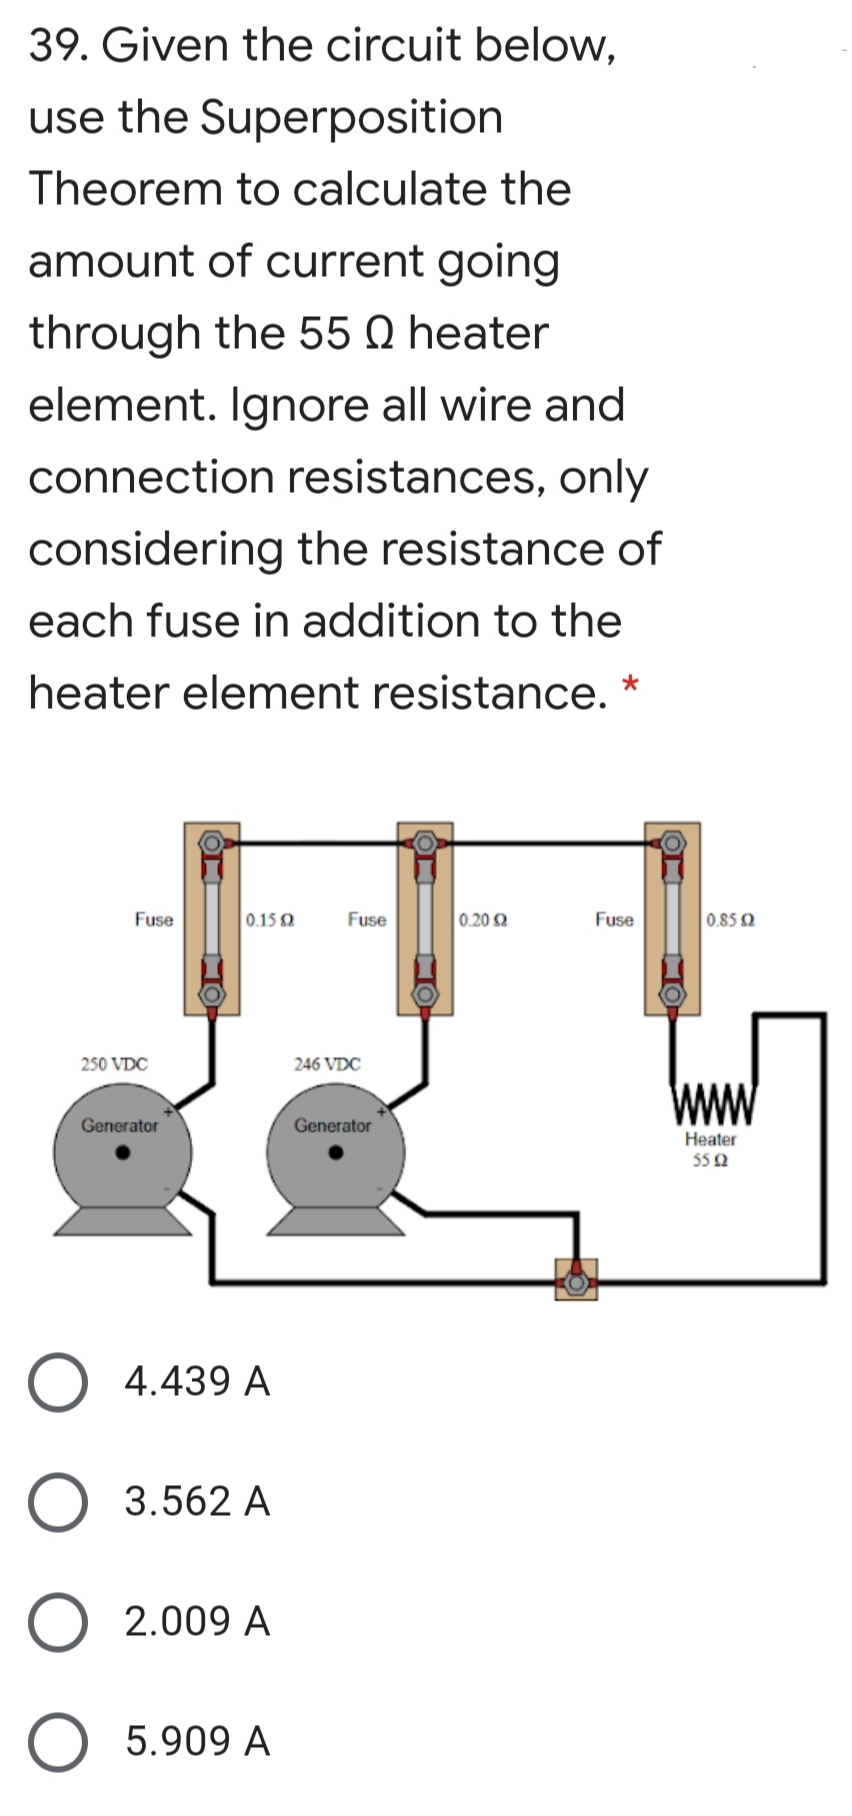 39. Given the circuit below,
use the Superposition
Theorem to calculate the
amount of current going
through the 55 Q heater
element. Ignore all wire and
connection resistances, only
considering the resistance of
each fuse in addition to the
heater element resistance.
*
Fuse
0.15Q
Fuse
0.20 2
Fuse
0.85 2
250 VDC
246 VDC
Generator
Generator
Heater
55 2
4.439 A
3.562 A
2.009 A
O 5.909 A
